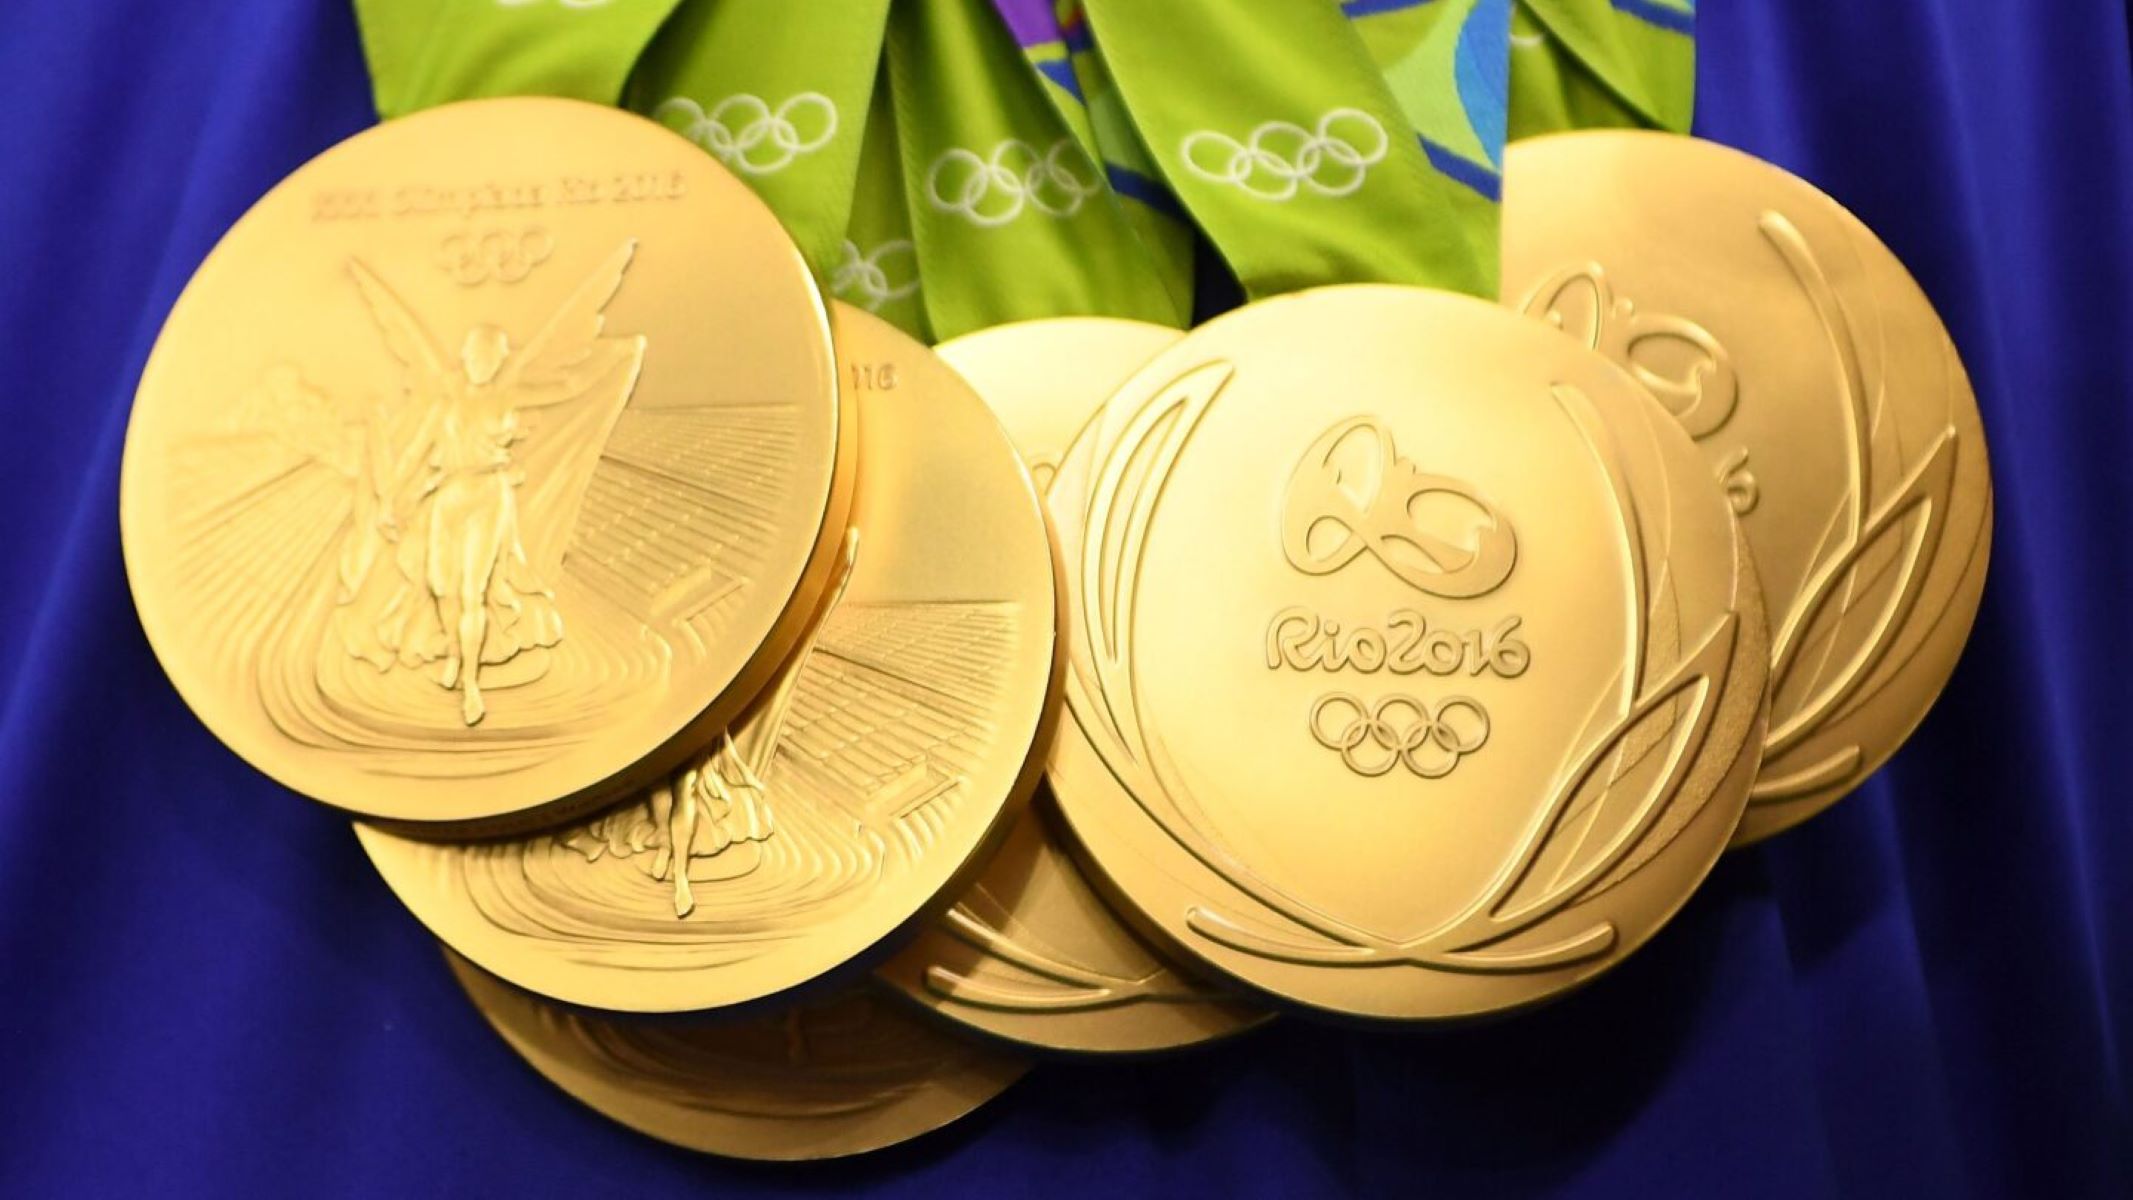 Who Has The Most Gold Medals In Track And Field